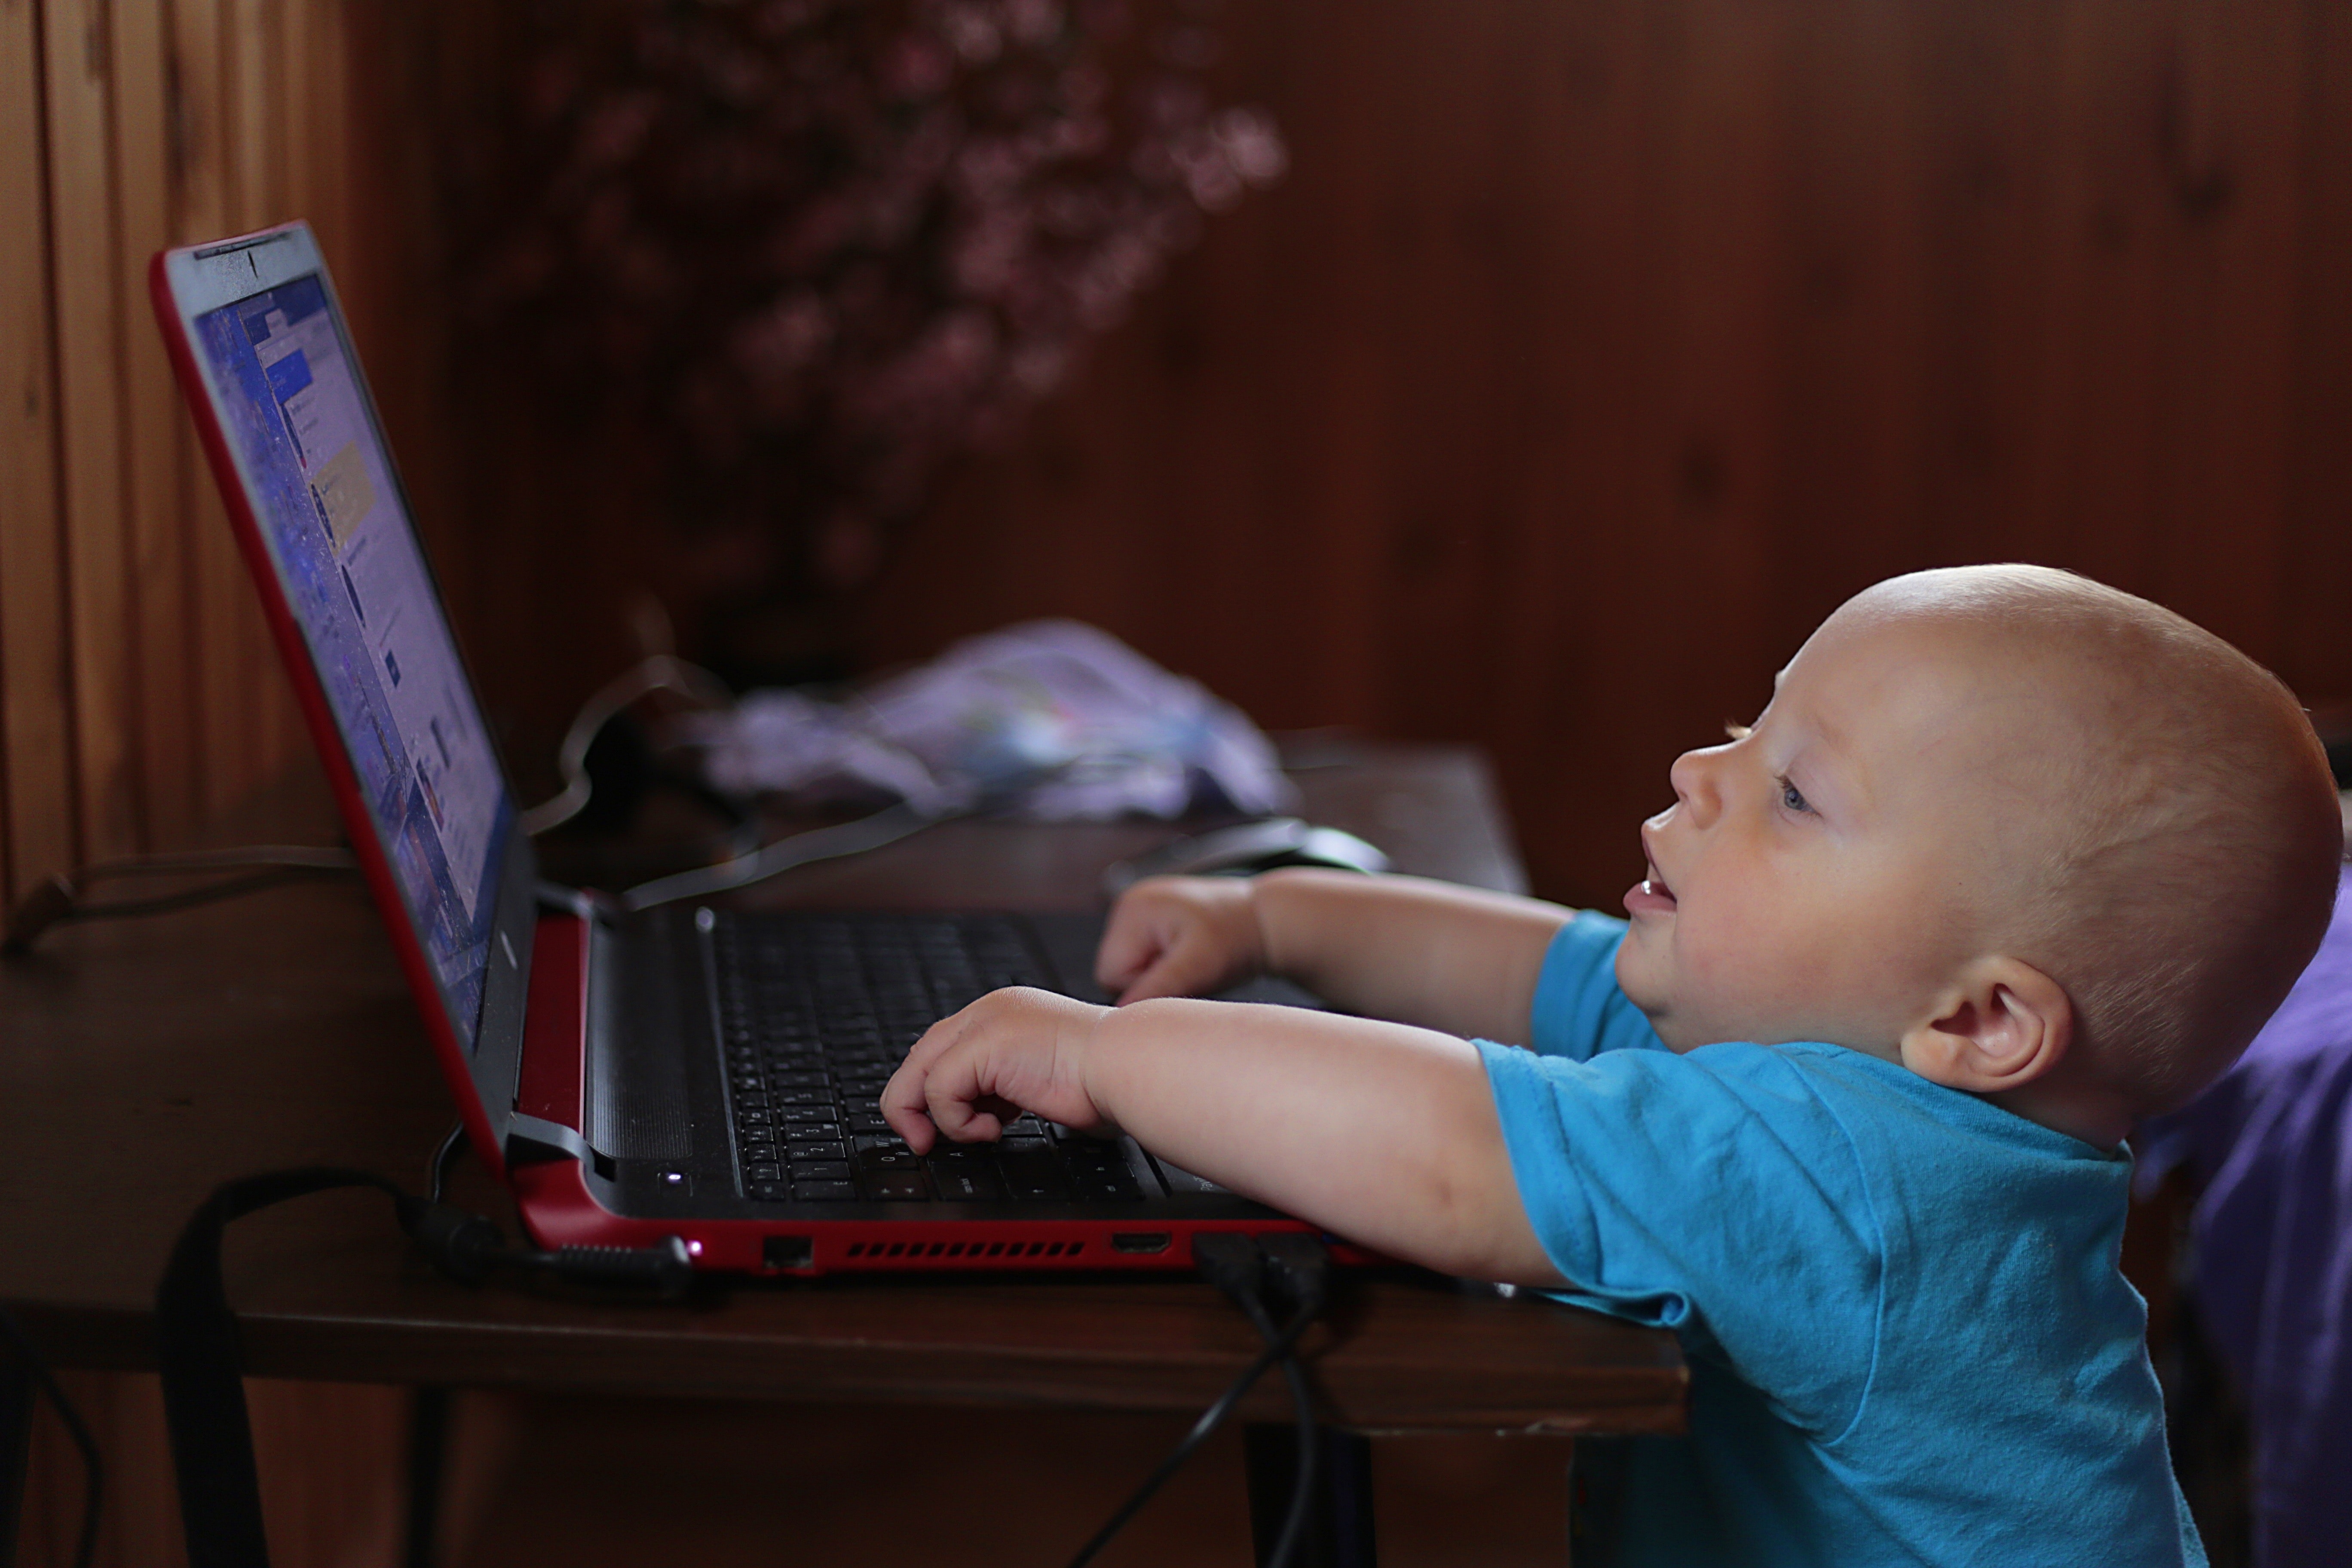 Top 10 Best Toddler Laptop for learning